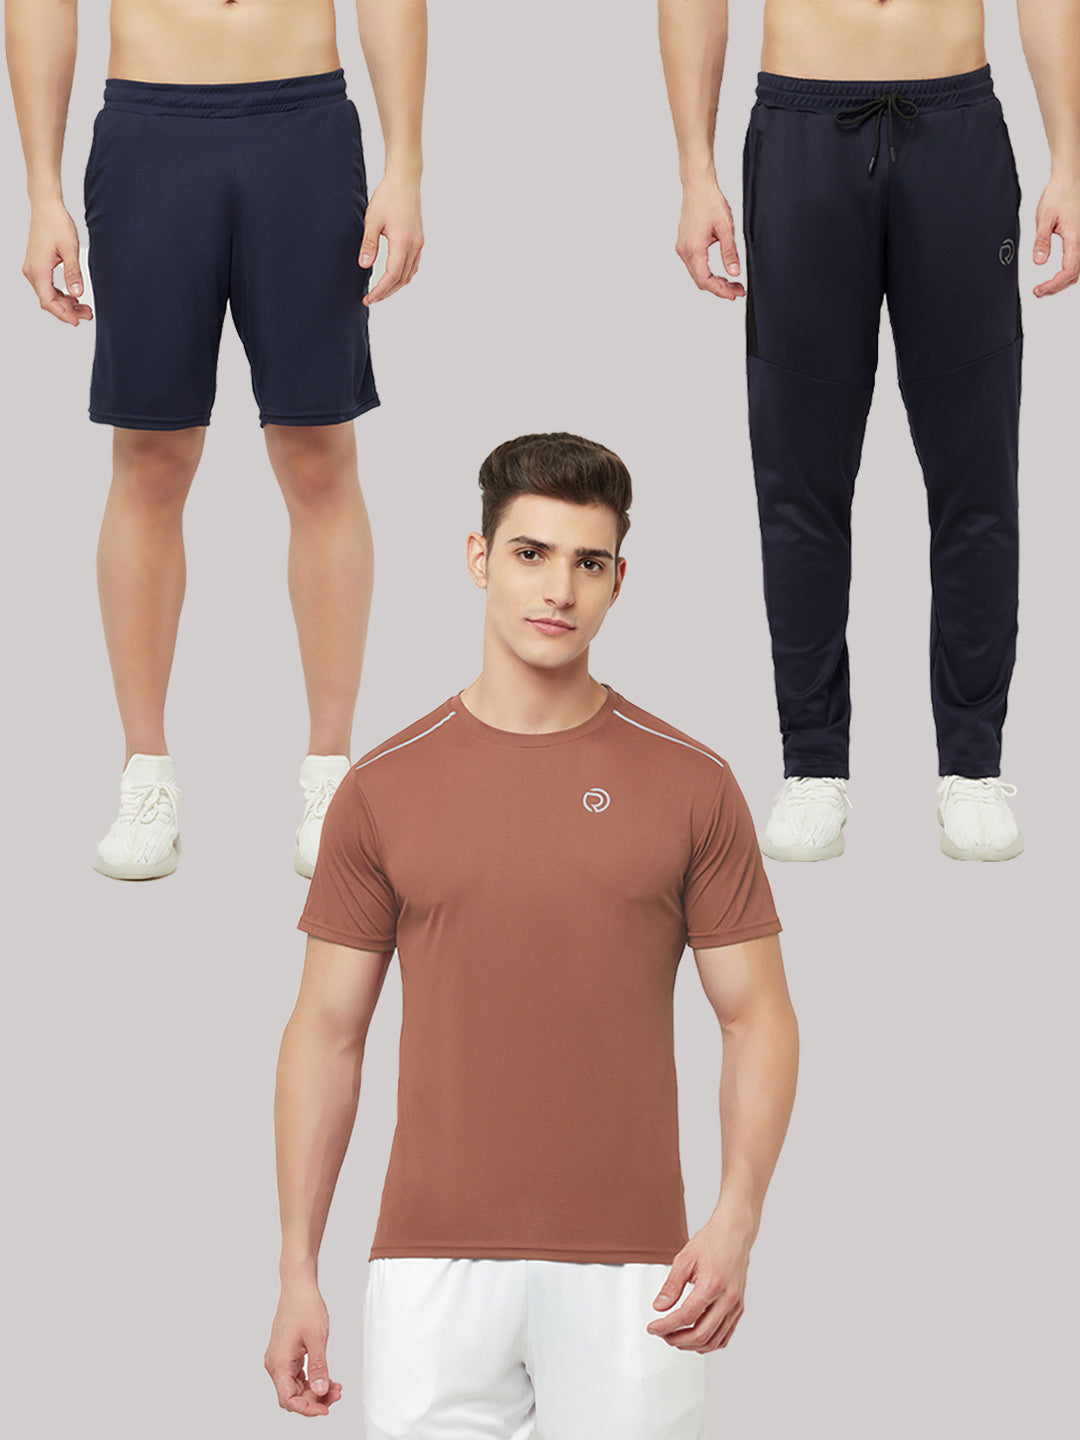 Shorts For Men Combo Pack of 3